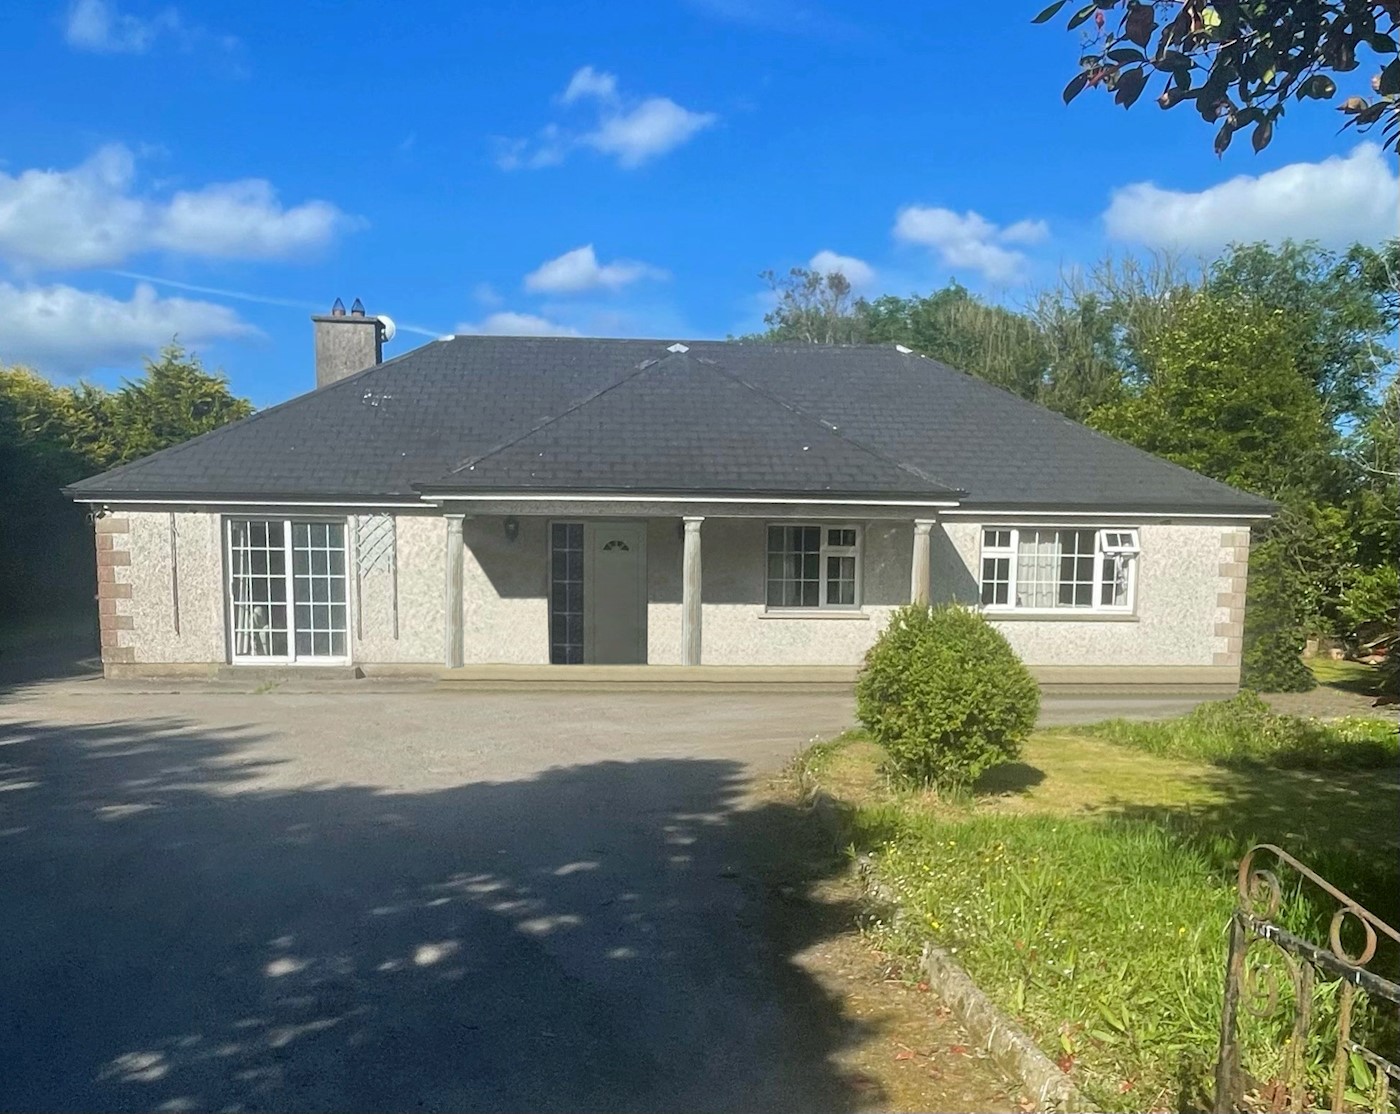 Youngstown, Taghmon, Co. Wexford, Y35 TC66 1/4